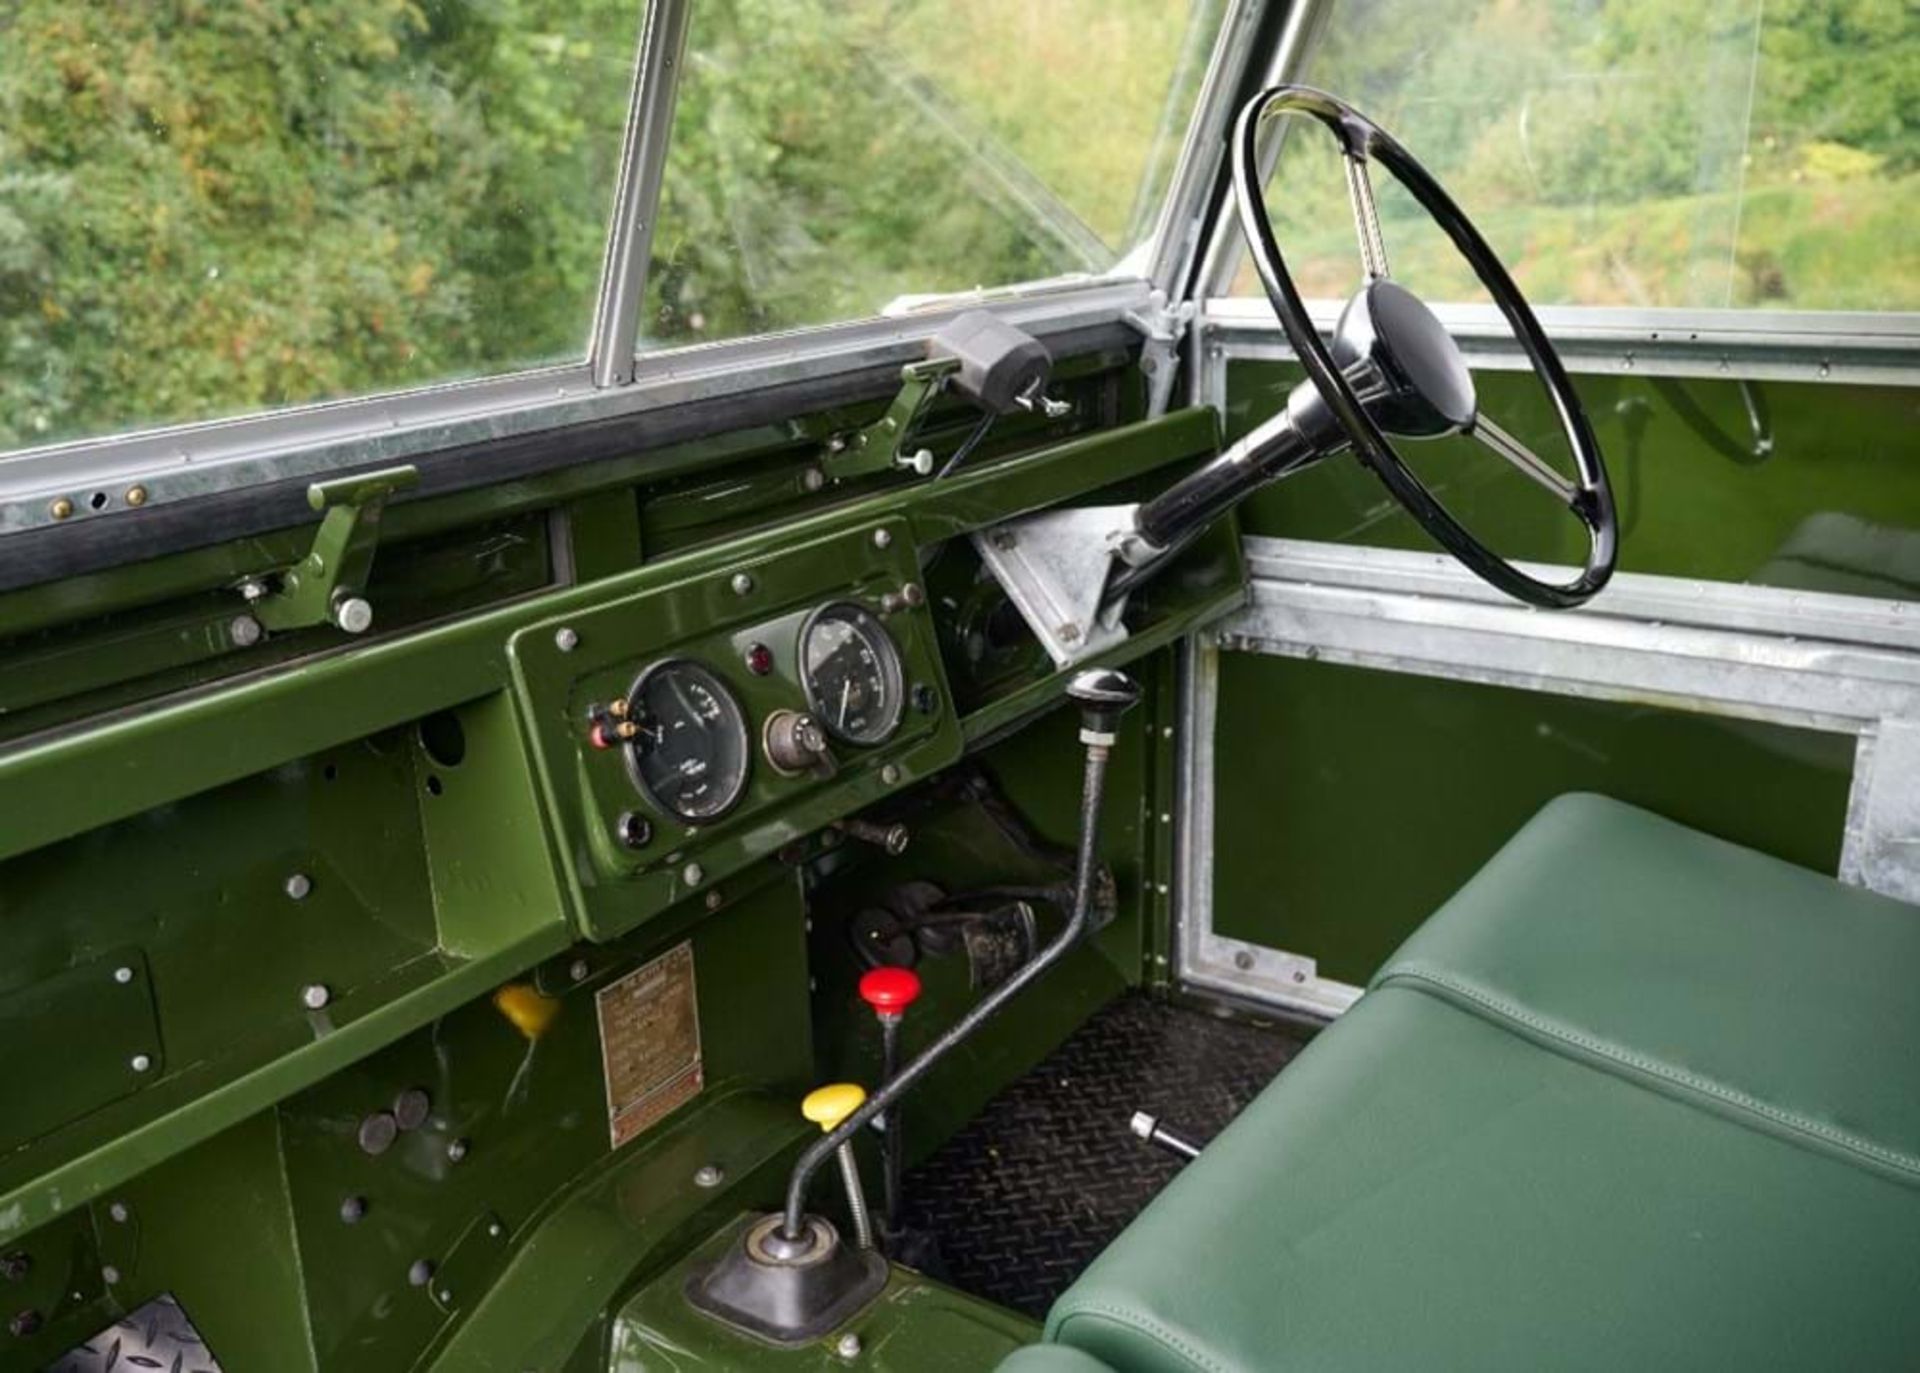 1954 Land Rover Series I (86") - Image 9 of 10